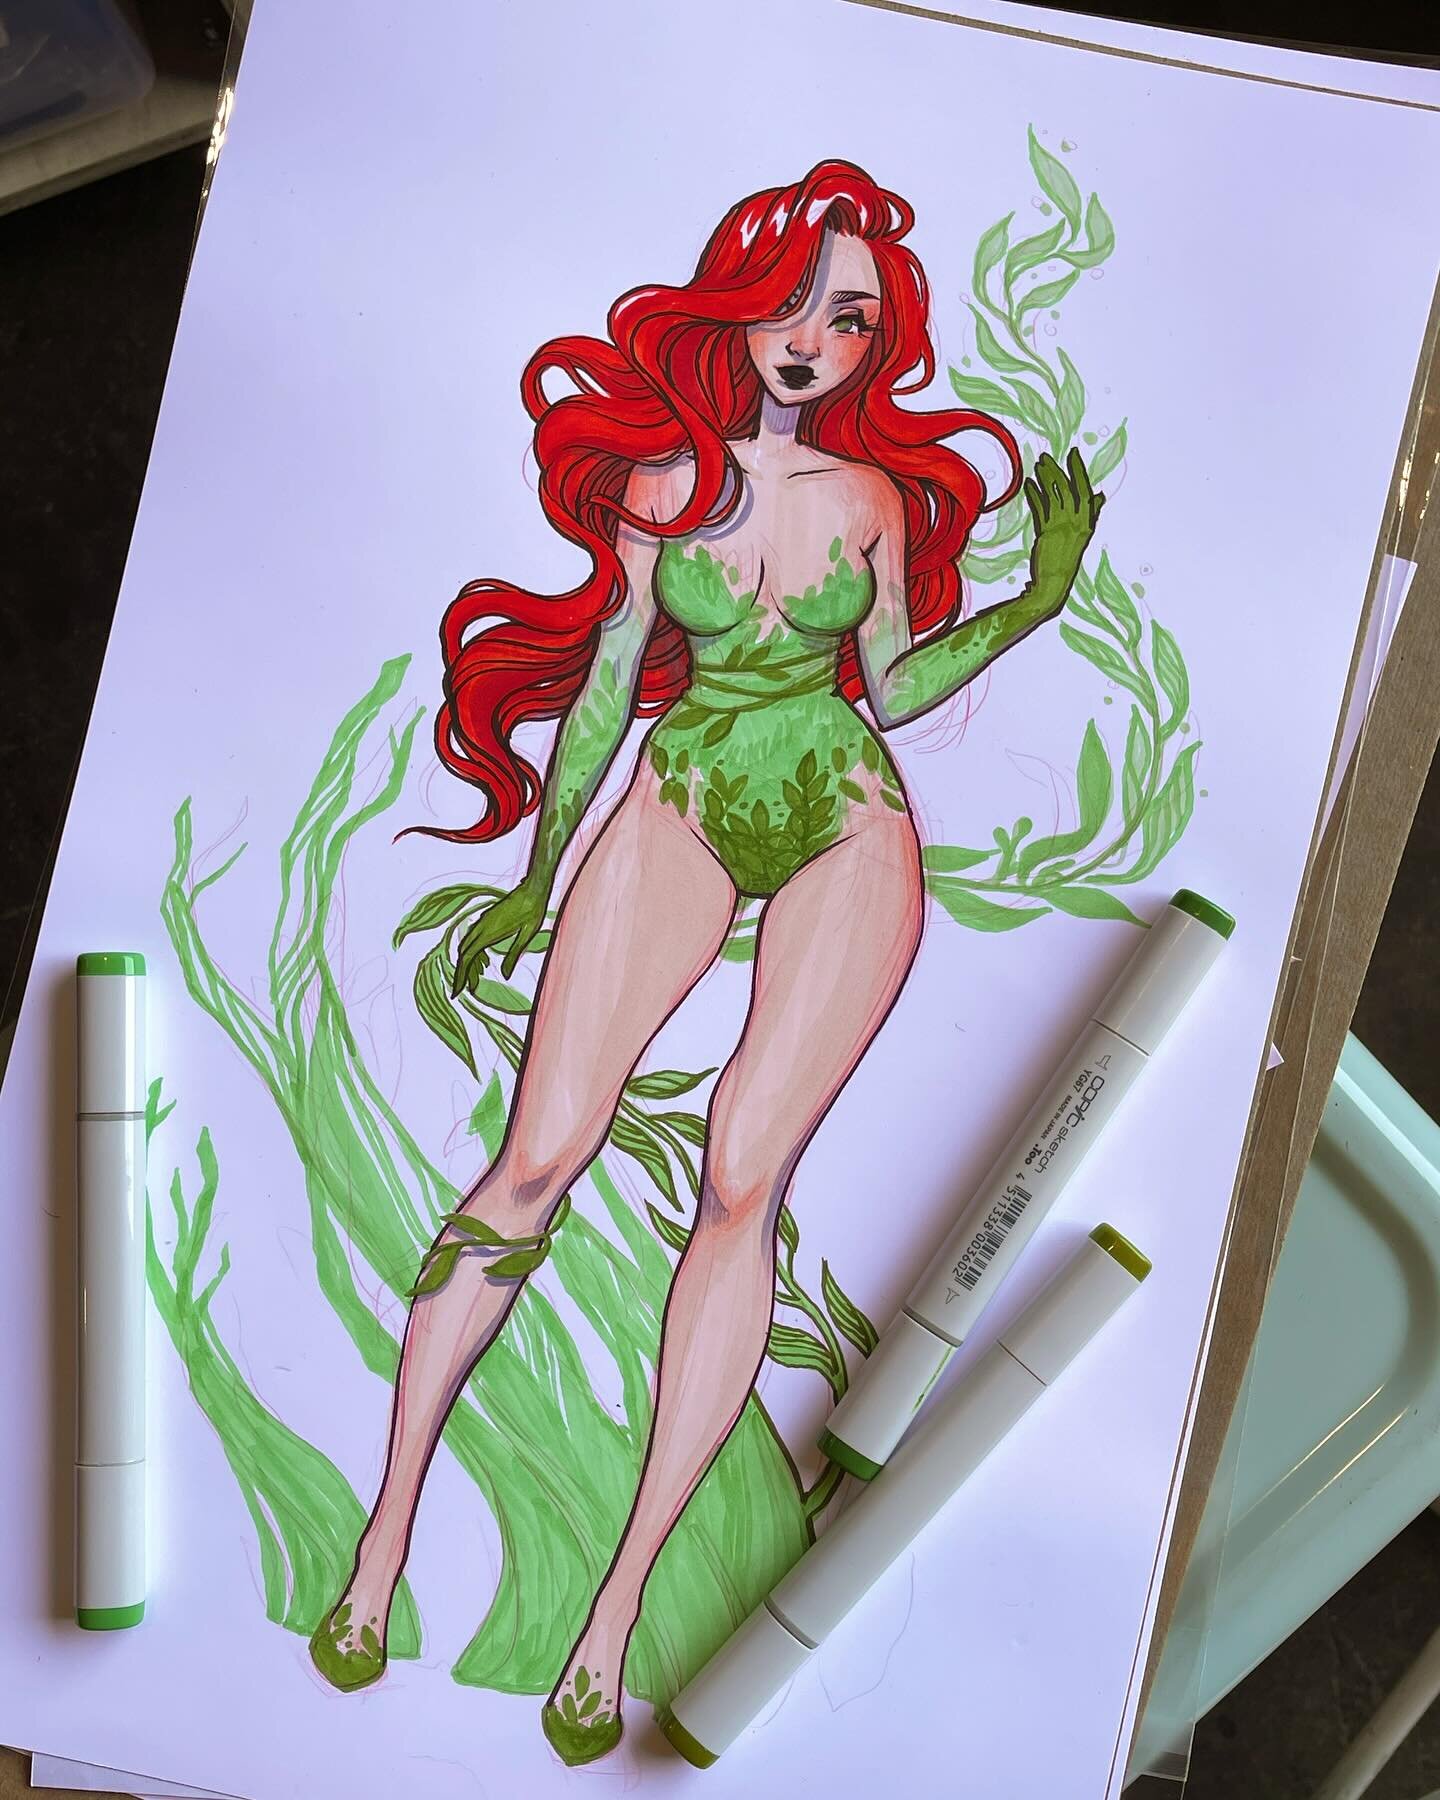 I just realized I never posted this commission I took during @capecowlcomics comic con a few months ago! I had so much fun working on poison ivy and it was nice to just turn my brain off and draw someone else&rsquo;s character hahah
Speaking of commi